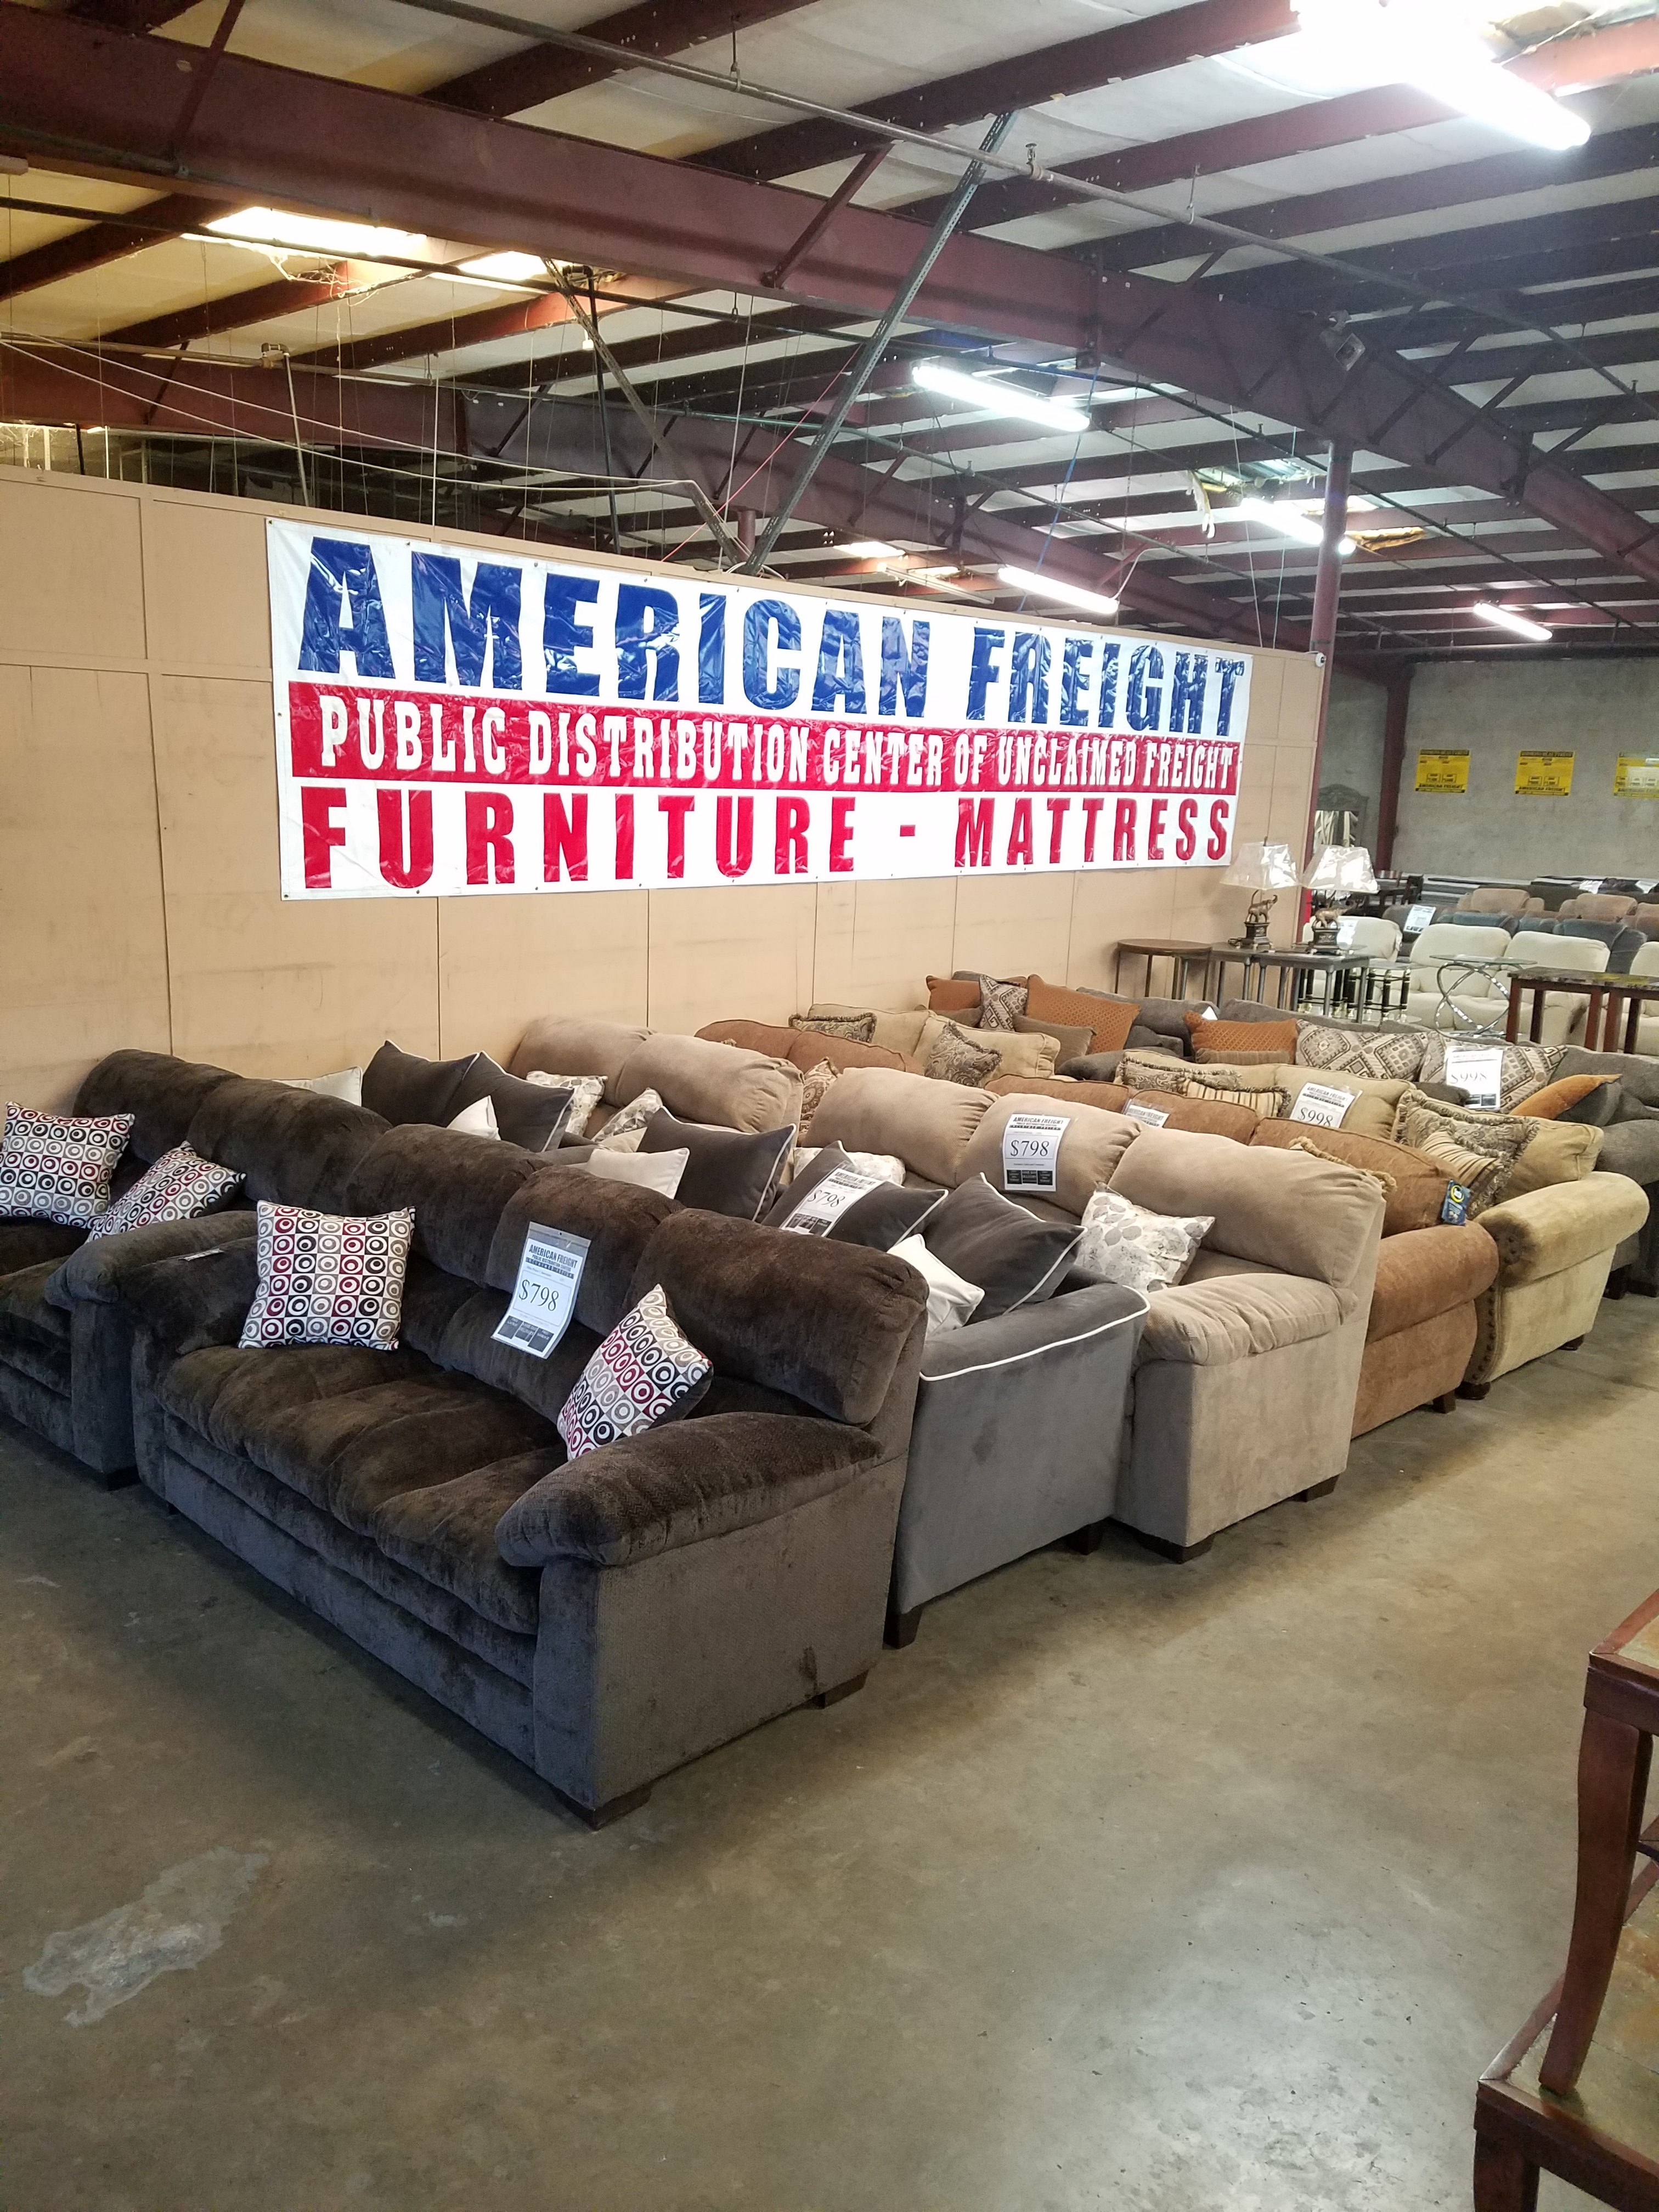 American Freight Furniture and Mattress Coupons near me in Shreveport, LA 71107 | 8coupons